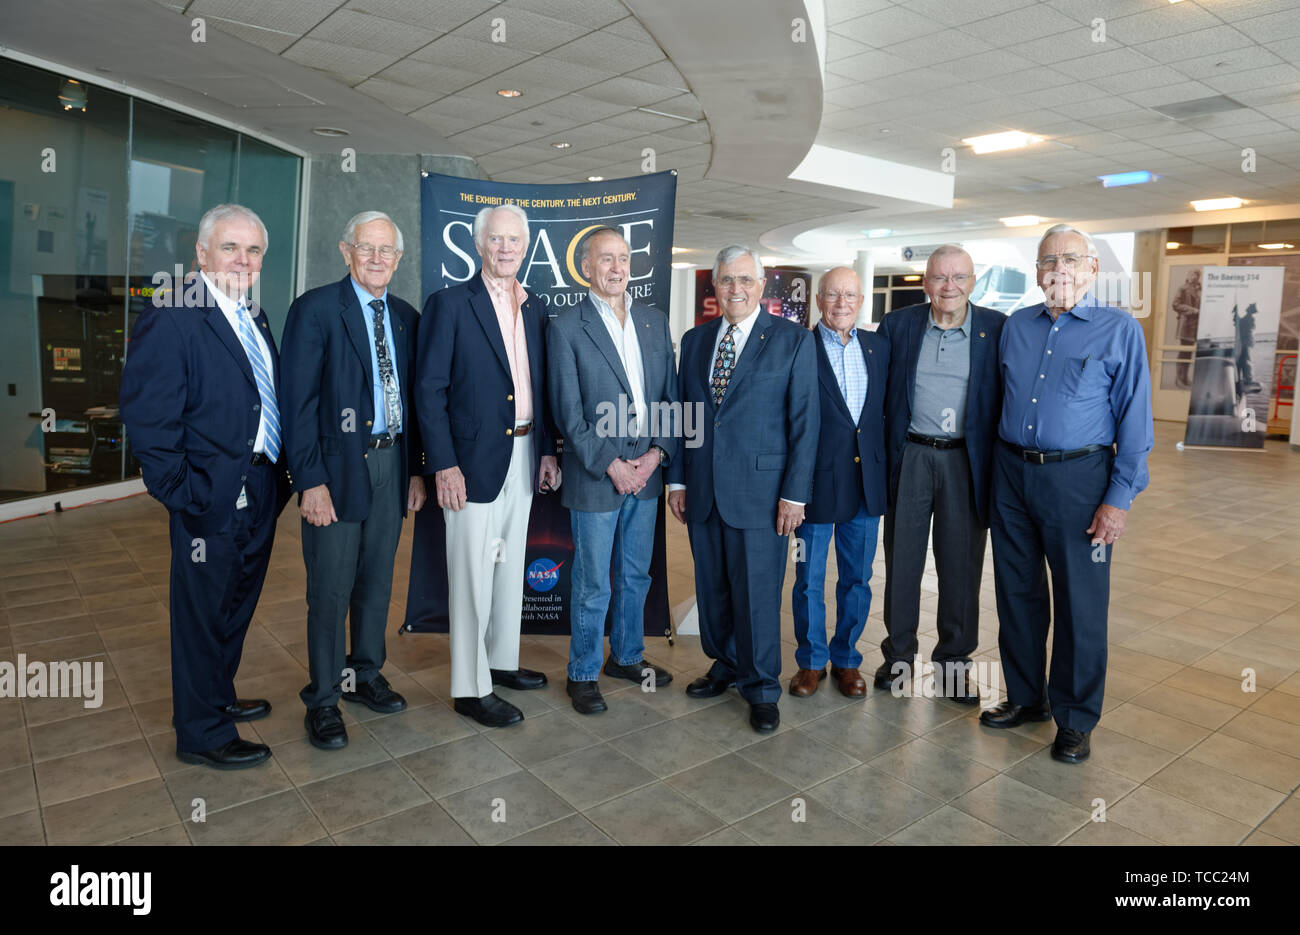 Garden City, New York, USA. 6th June, 2019. L-R, ANDREW PARTON, President of Cradle of Aviation Museum; astronaut CHARLES DUKE, Apollo 13 Lunar Module Pilot; RUSTY SCHWEICKART, Apollo 9 LM Pilot, WALTER CUNNINGHAM, Apollo 7 LM Pilot: HARRISON SCHMITT, Apollo 17 LM Pilot; GERRY GRIFFIN, Apollo Flight Director; FRED HAISE, Apollo 13 Lunar Module Pilot; and MILTON WINDLER, Apollo Flight Director, pose for group photo at Cradle of Aviation Museum's Apollo Astronauts Press Conference during its day of events celebrating 50th Anniversary of Apollo 11. Credit: Ann Parry/ZUMA Wire/Alamy Live News Stock Photo